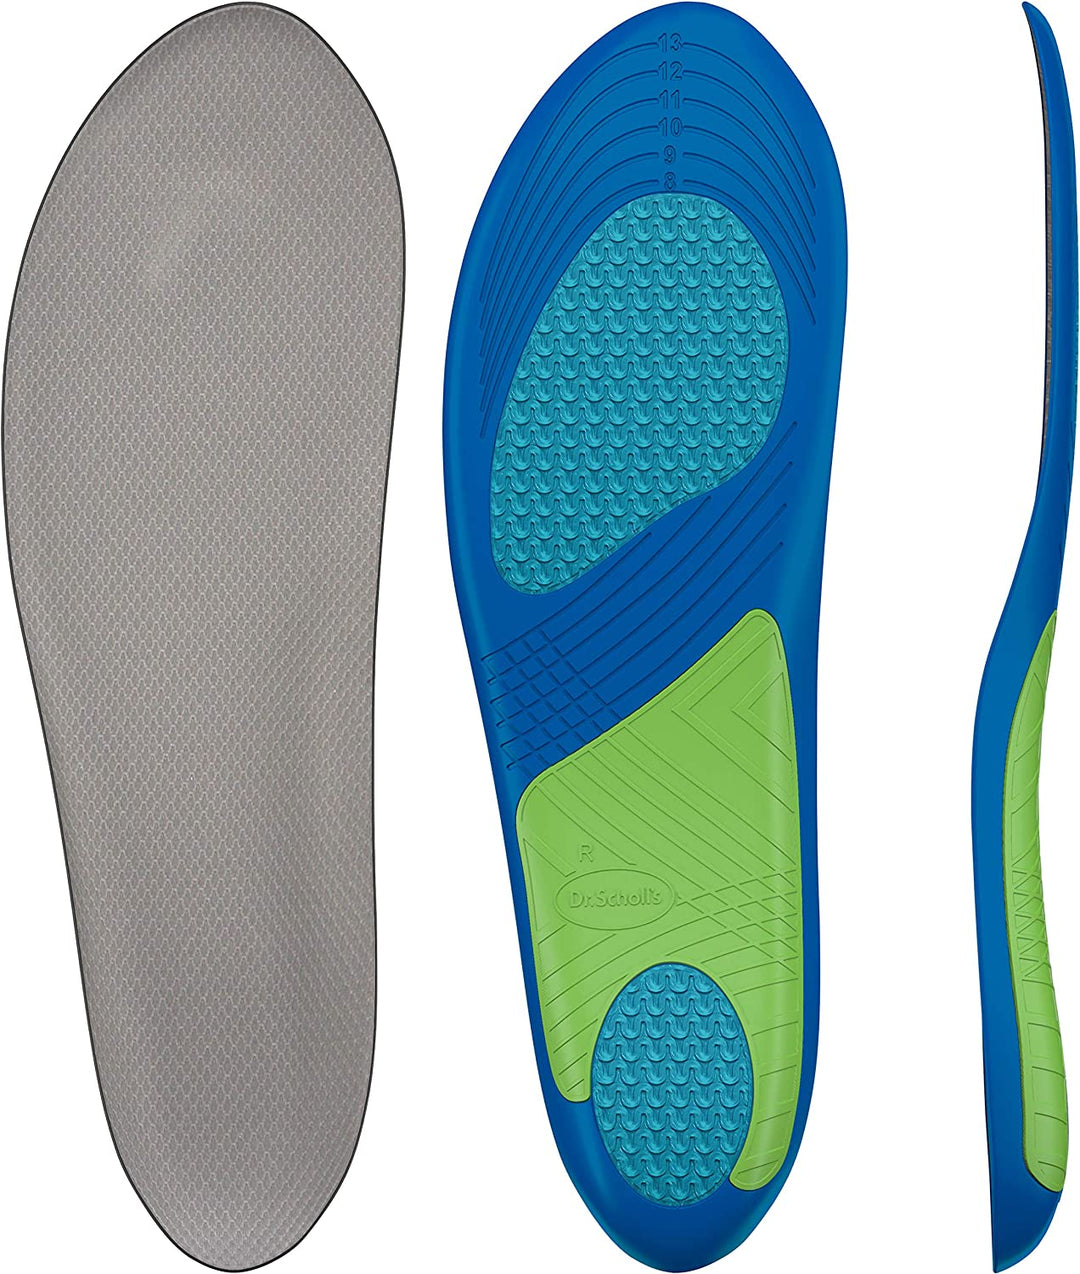 Dr. Scholl's All-Purpose Sport & Fitness Comfort Insoles 1 Pair, Trim to Fit